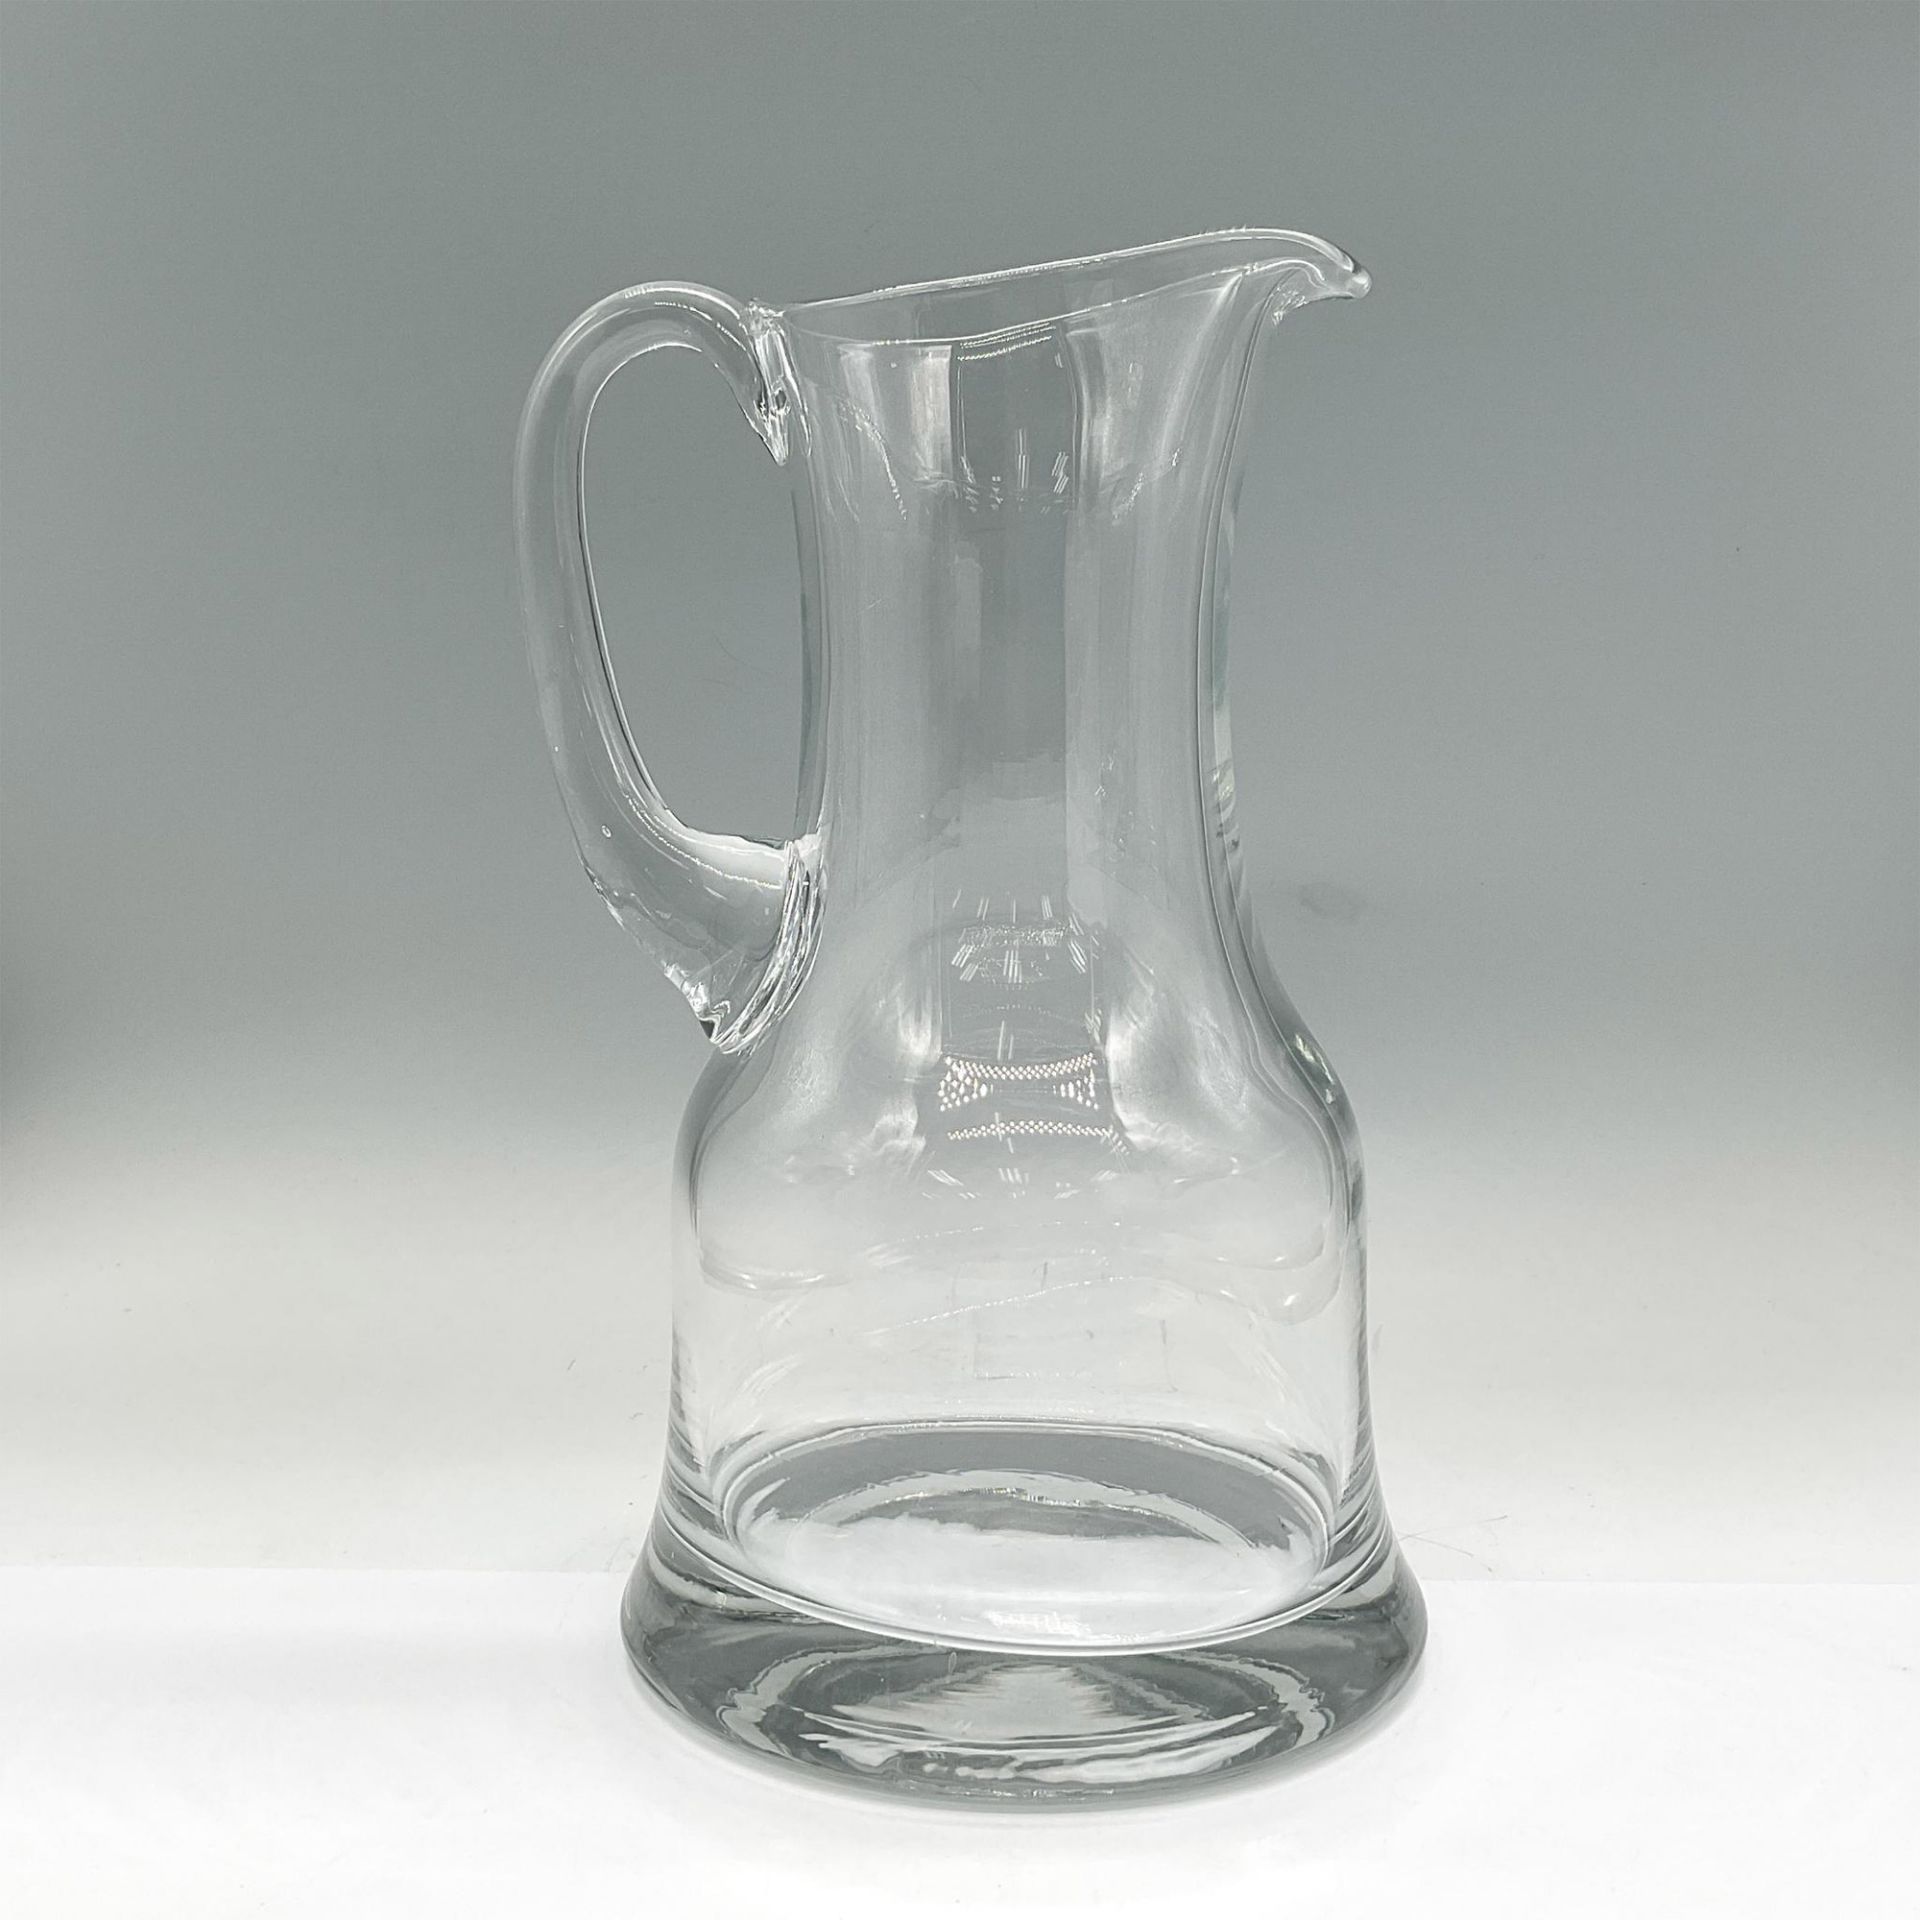 Large Glass Beverage Pitcher - Image 2 of 3